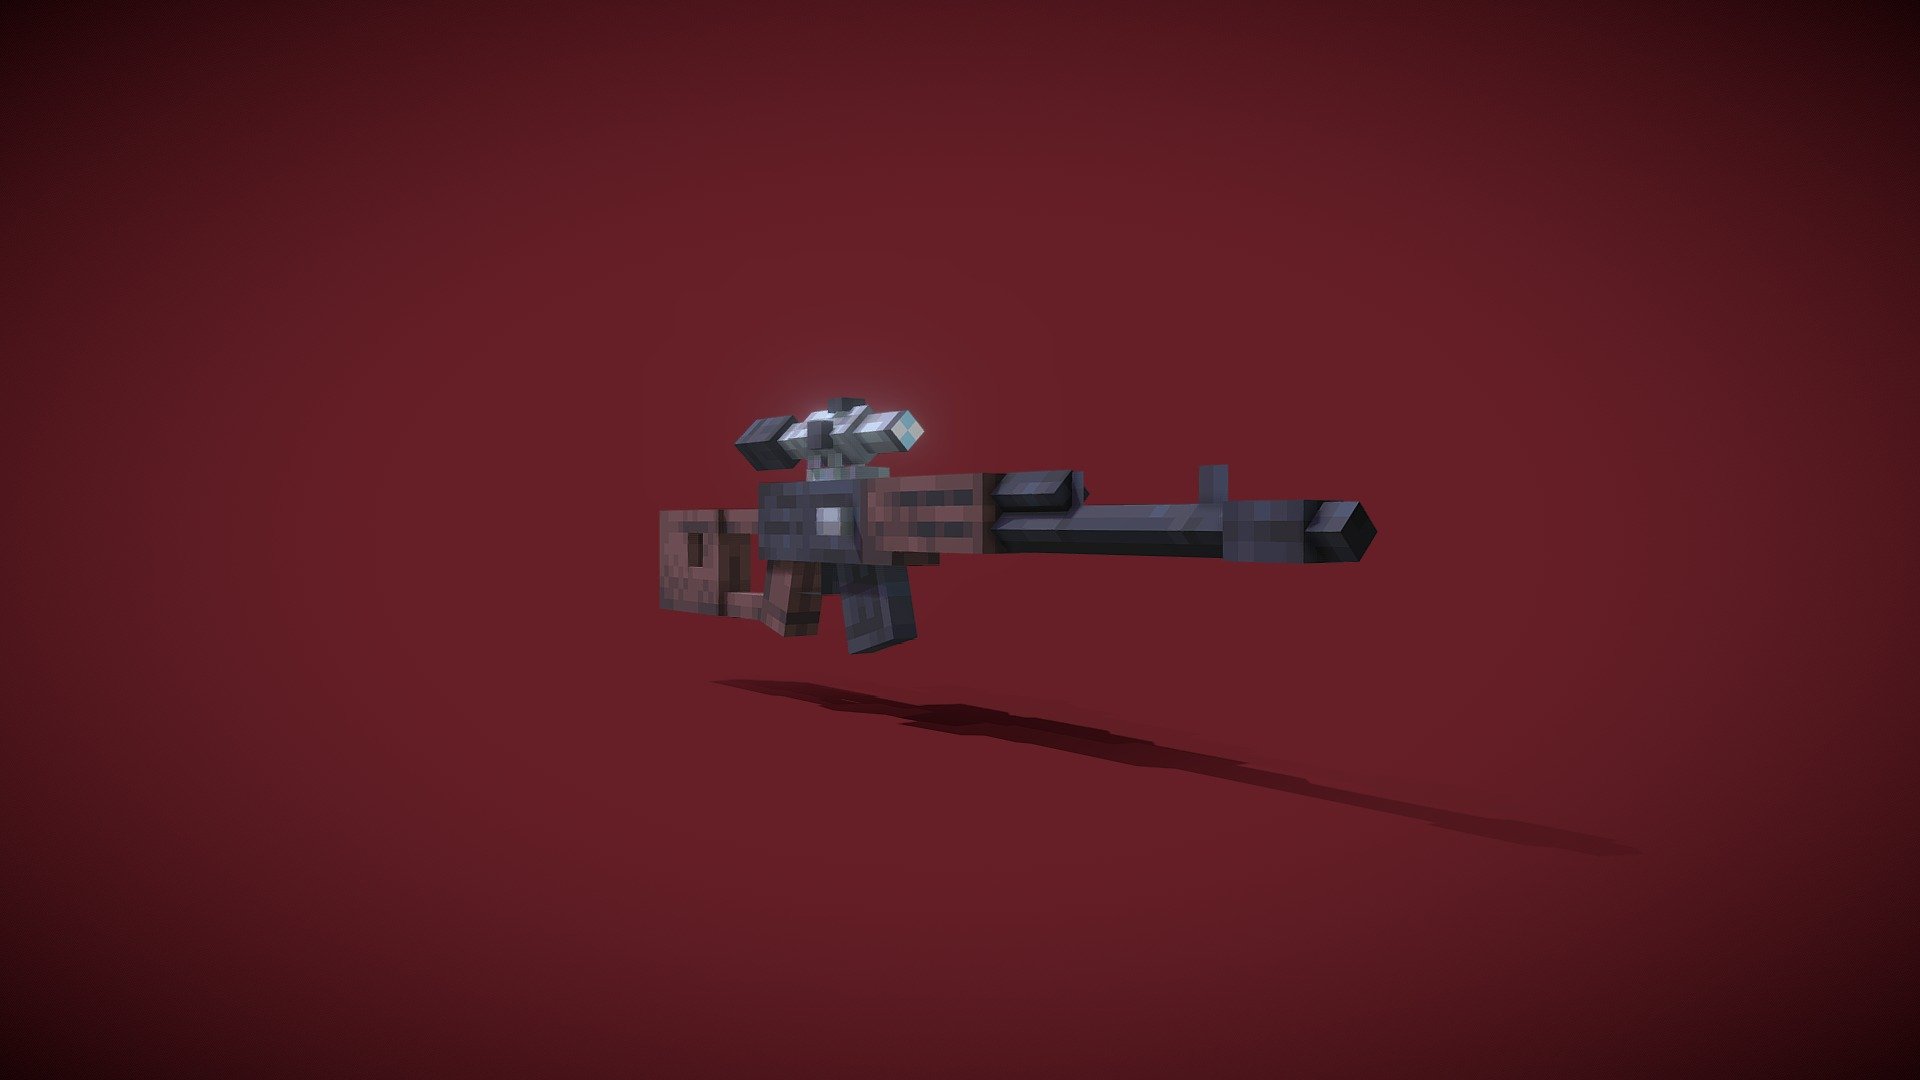 Low poly model of an SVD Dragunov, quite the iconic sniper rifle 3d model